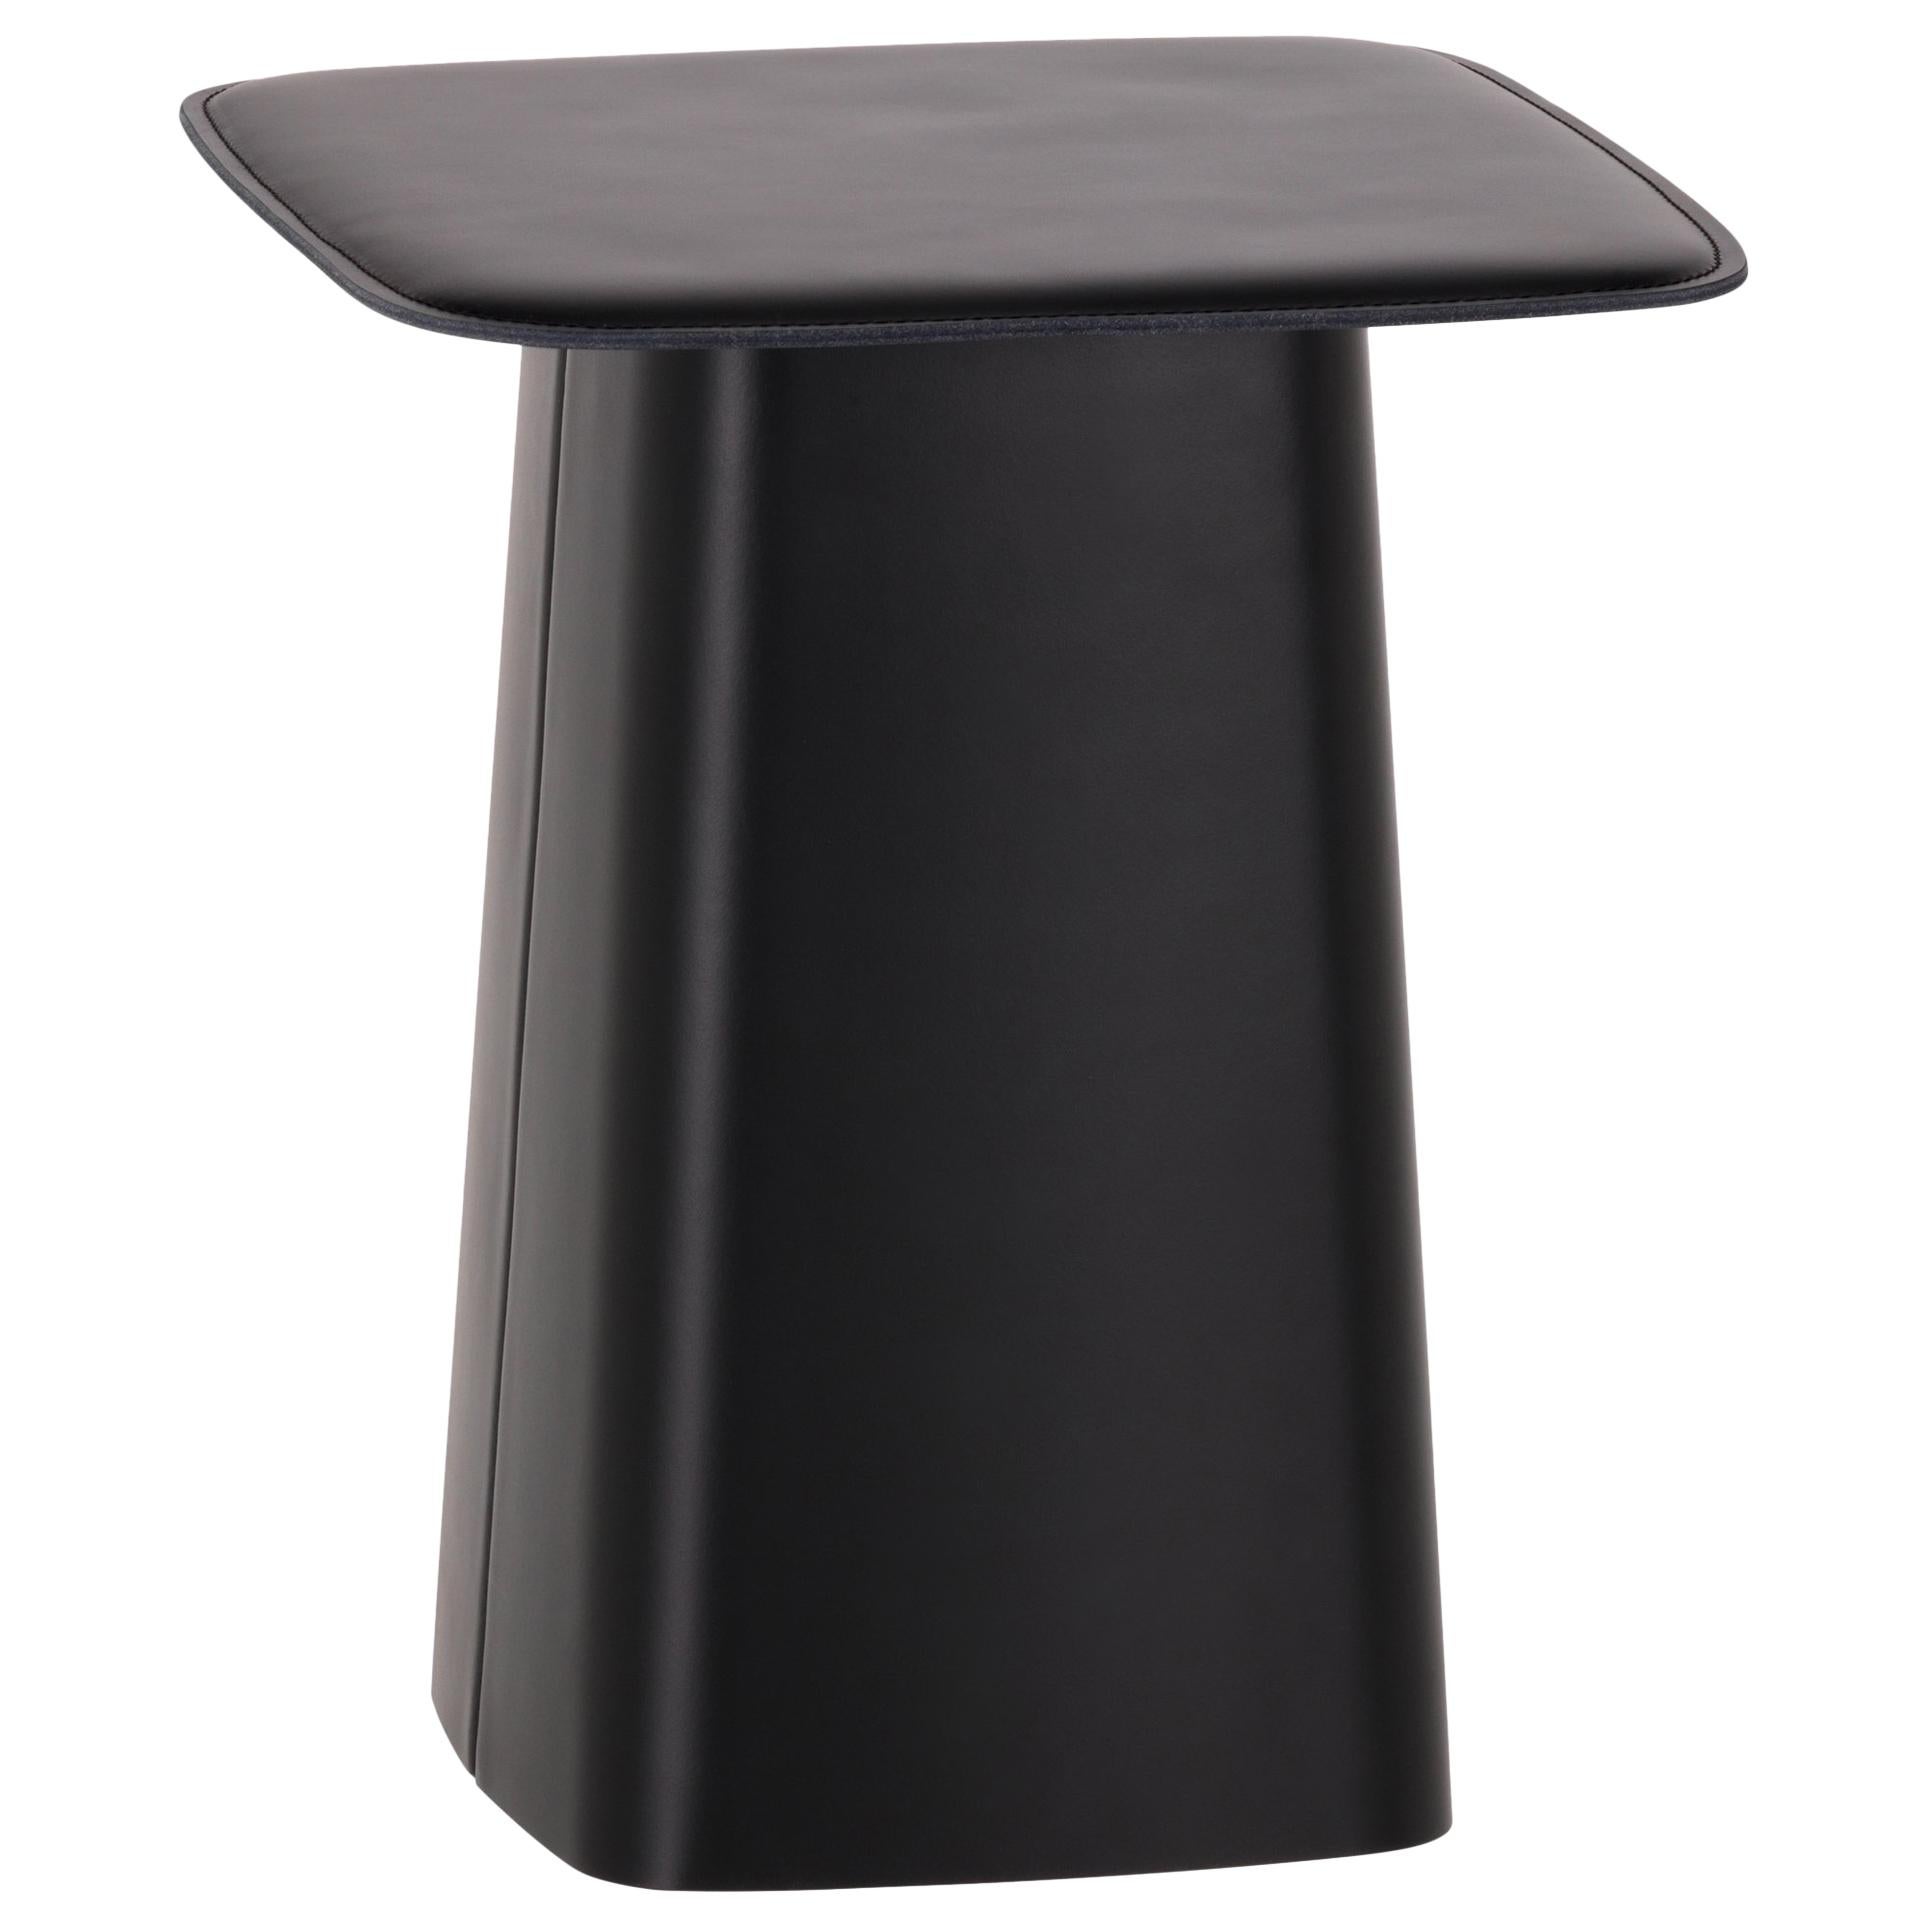 Vitra Small Leather Side Table in Nero Leather by Ronan & Erwan Bouroullec im Angebot